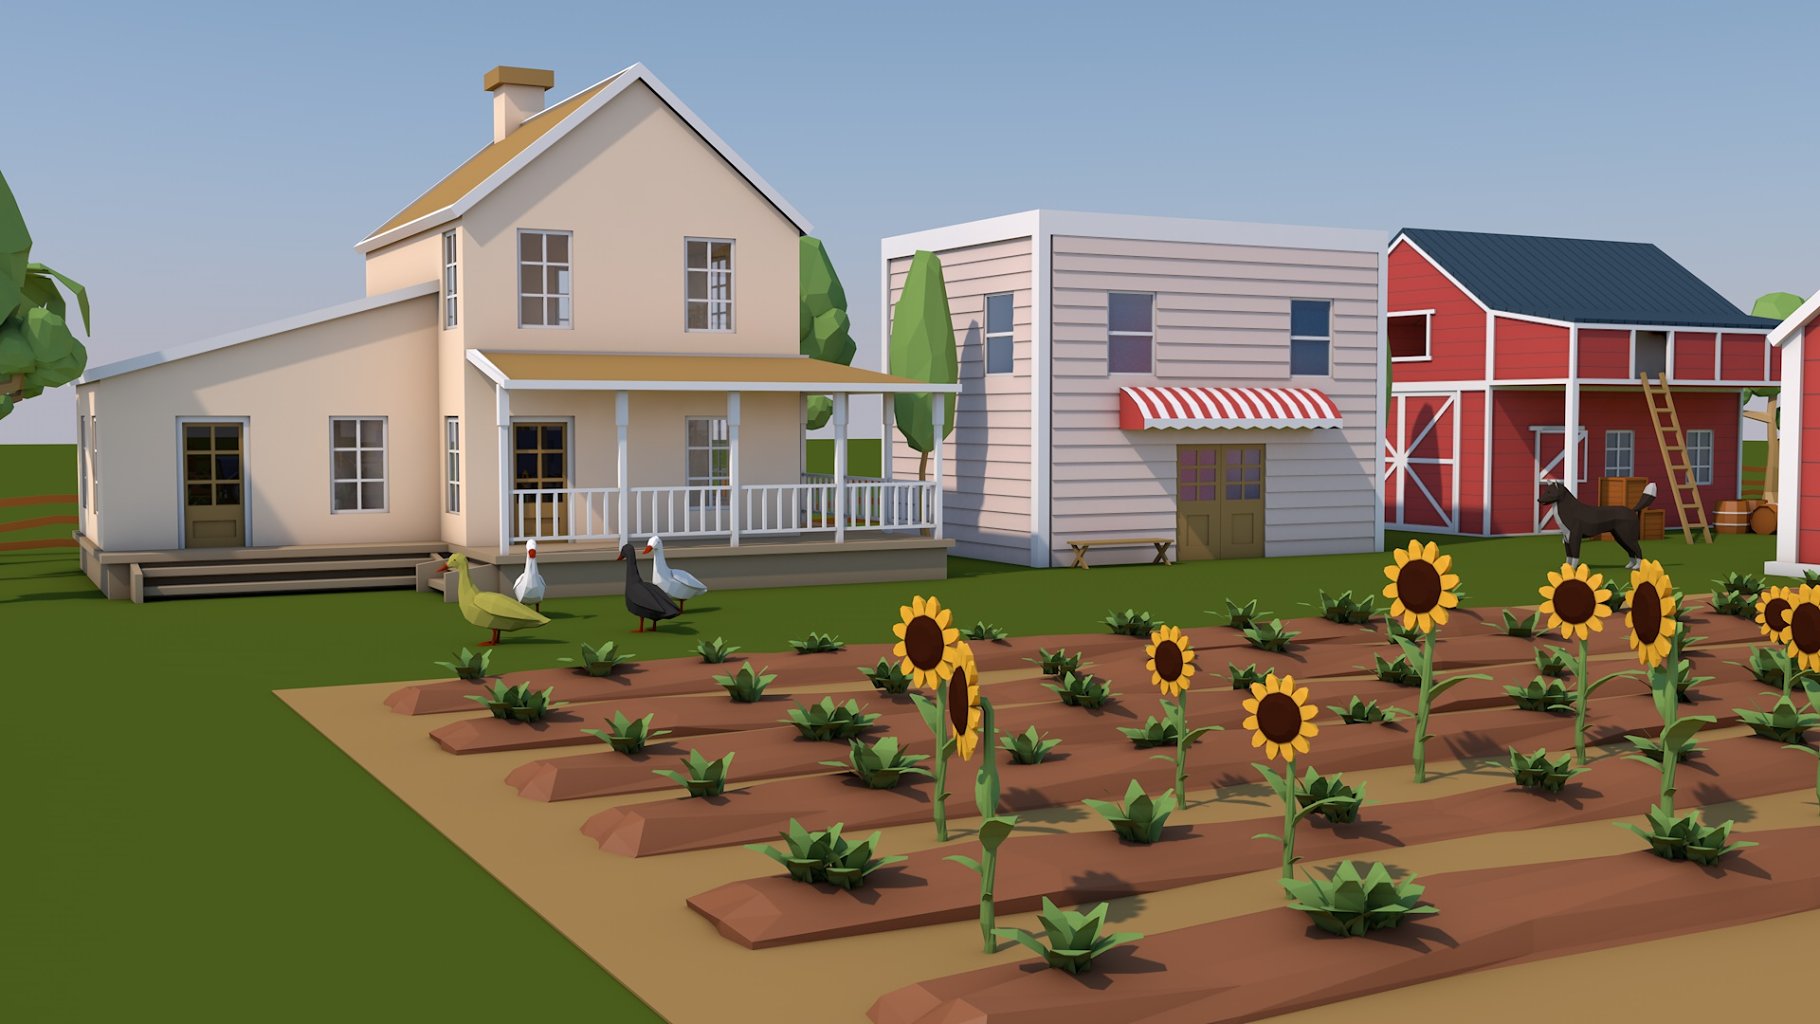 Sunflowers and houses.